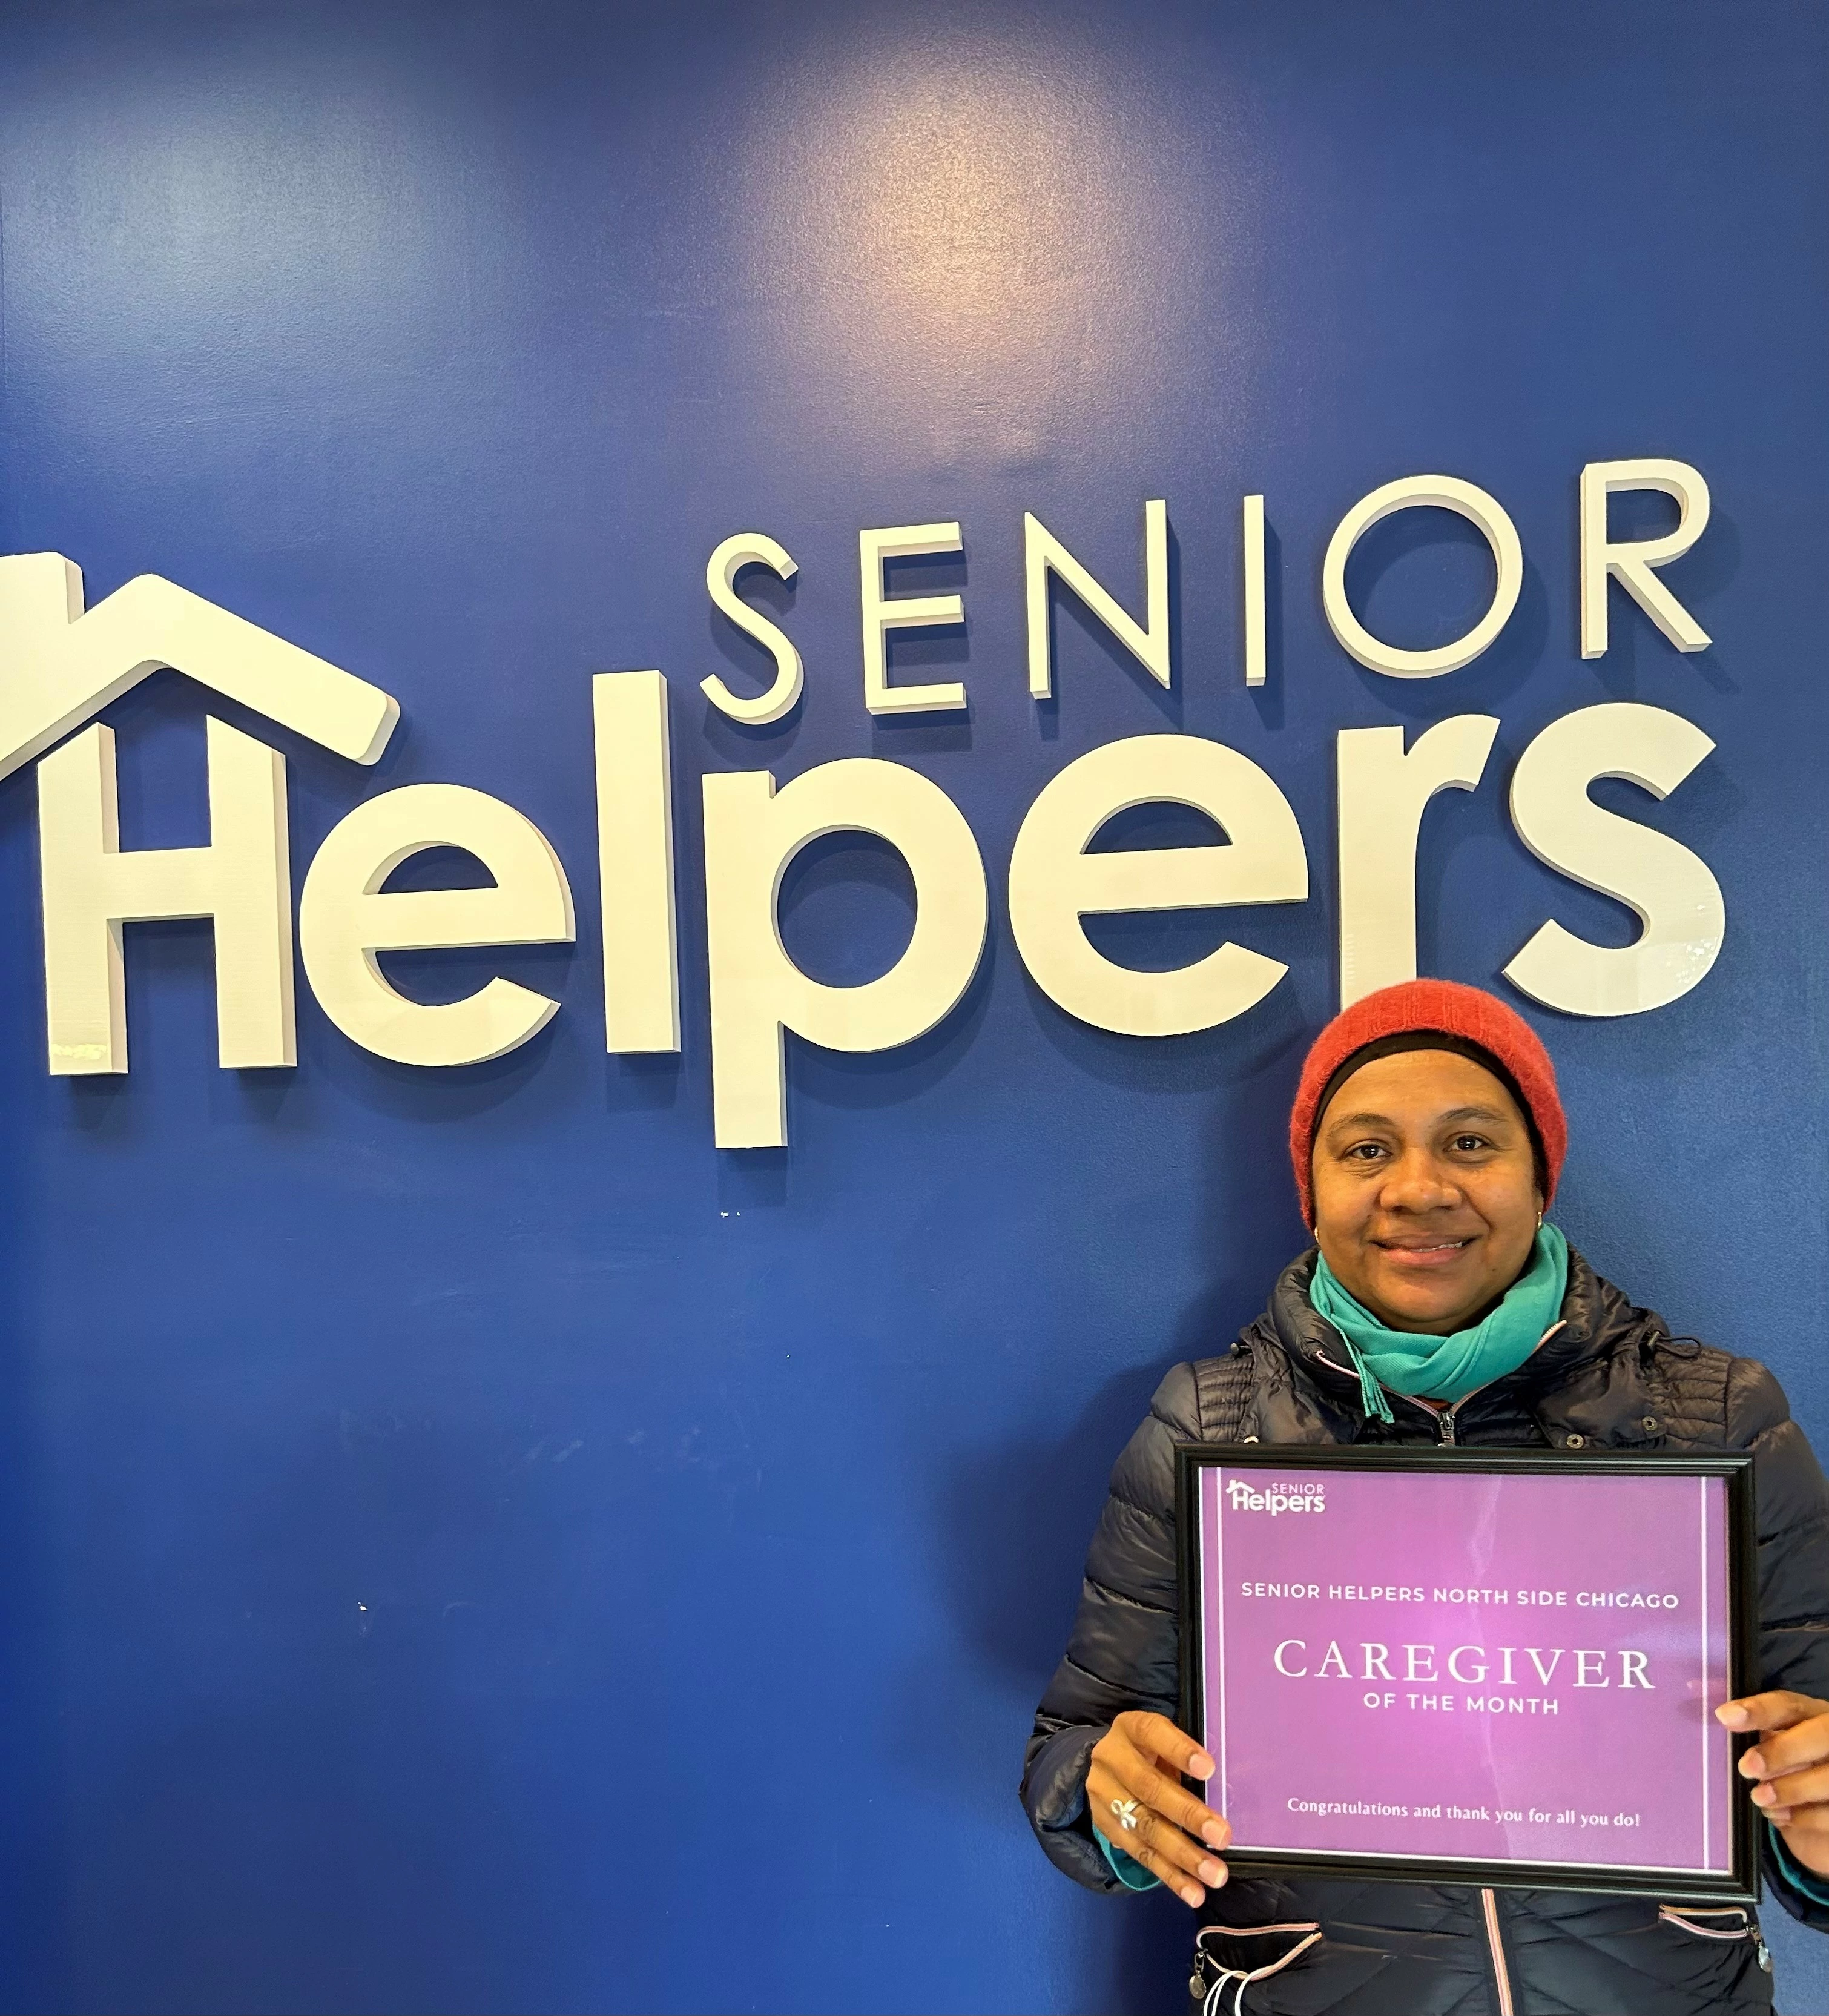 Congratulations to our October Caregiver of the month, Stephanie! Stephanie has shown exceptional caregiving skills that highlight genuine compassion, loyalty, and responsibility. We are most proud of how much she cares not just for her own client, but seniors in general. We are so grateful to have Stephanie on our team and can’t wait to see what the future holds for her.